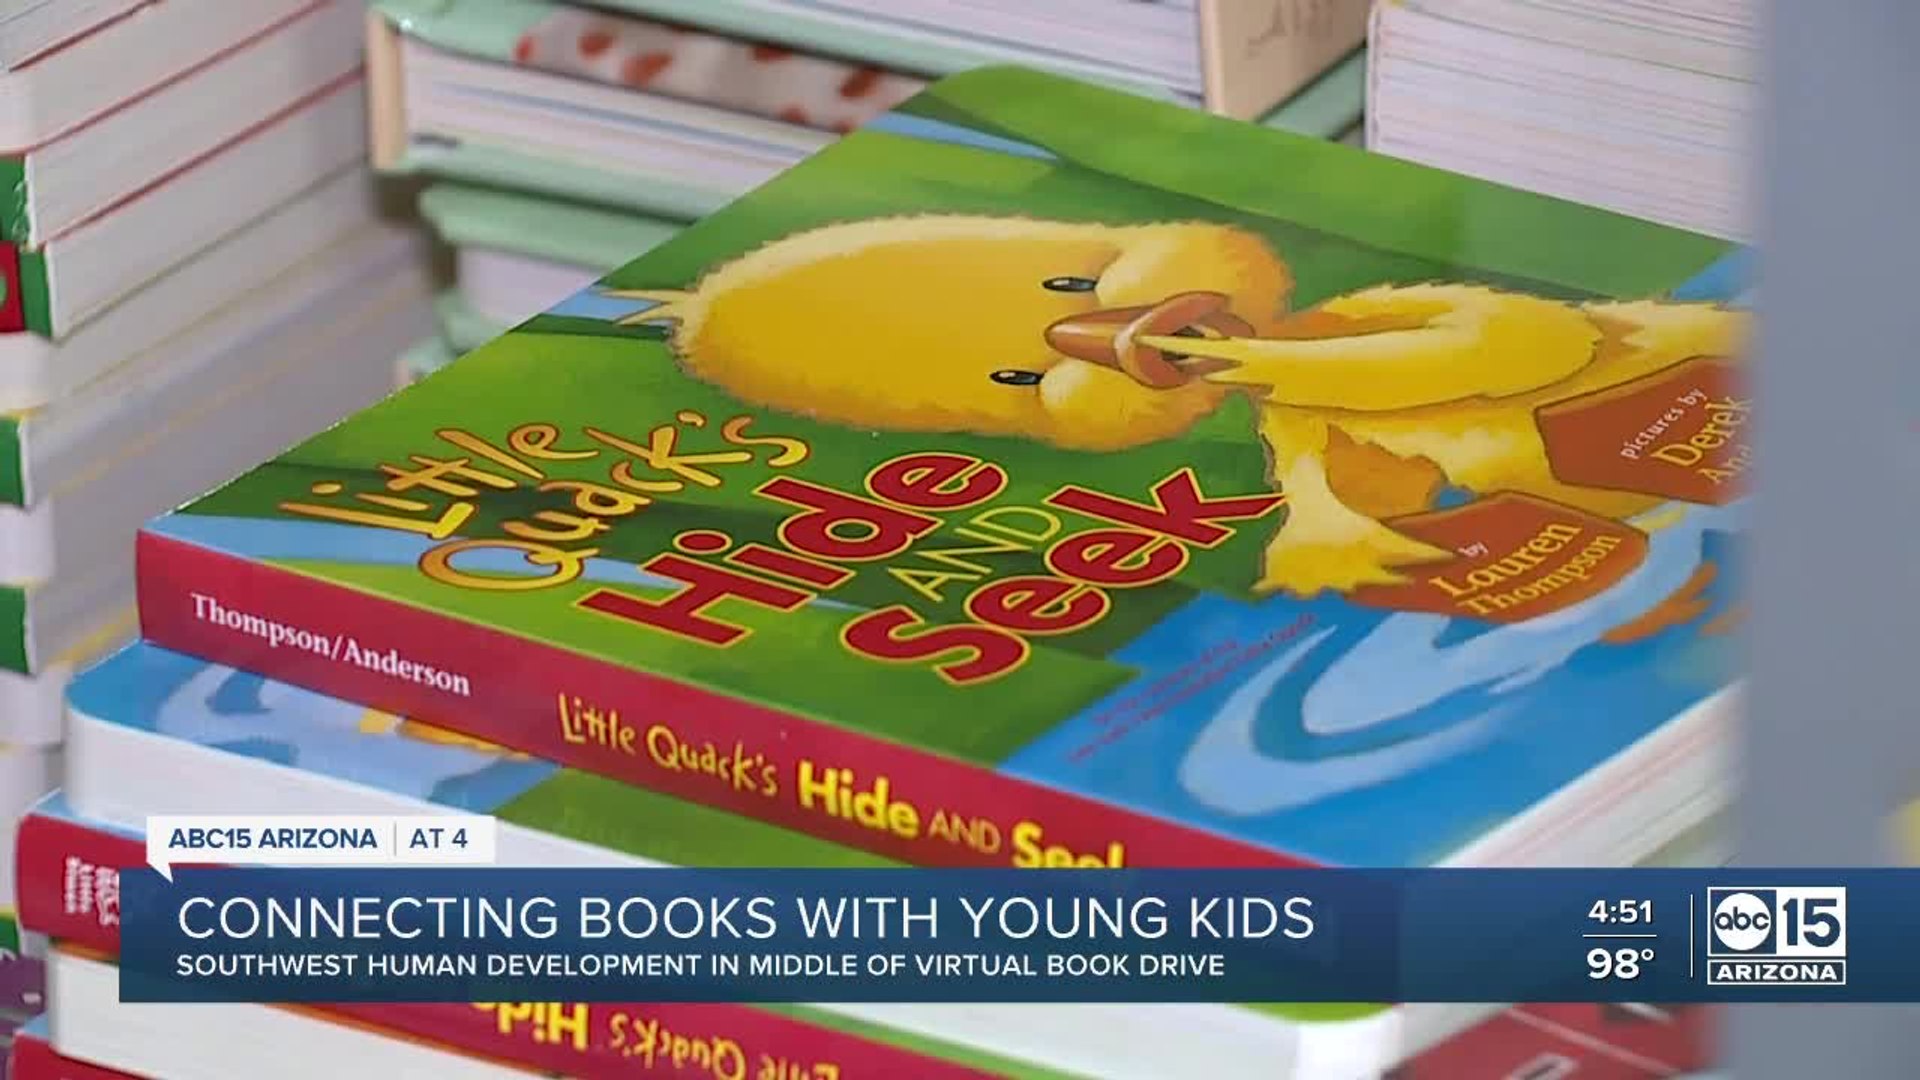 Non-profit connects young kids with books